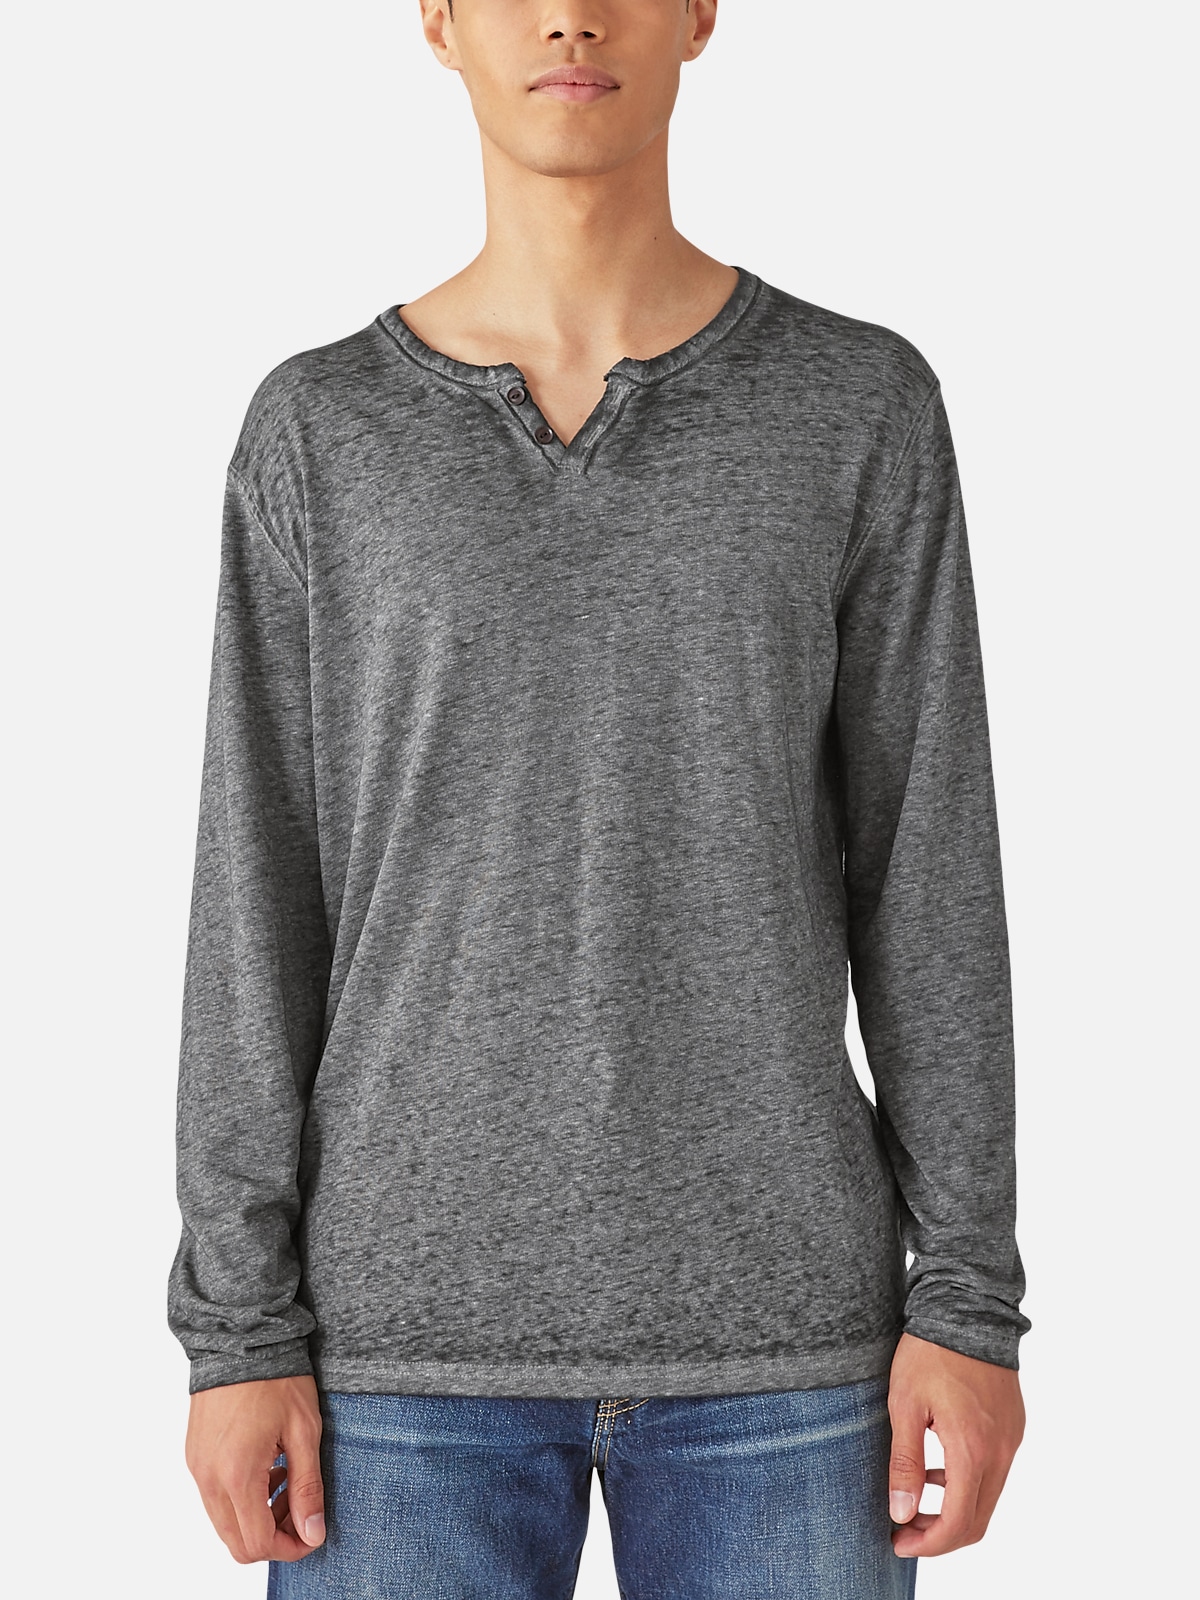 Lucky Brand Classic Fit Venice Long Sleeve T-Shirt, All Sale